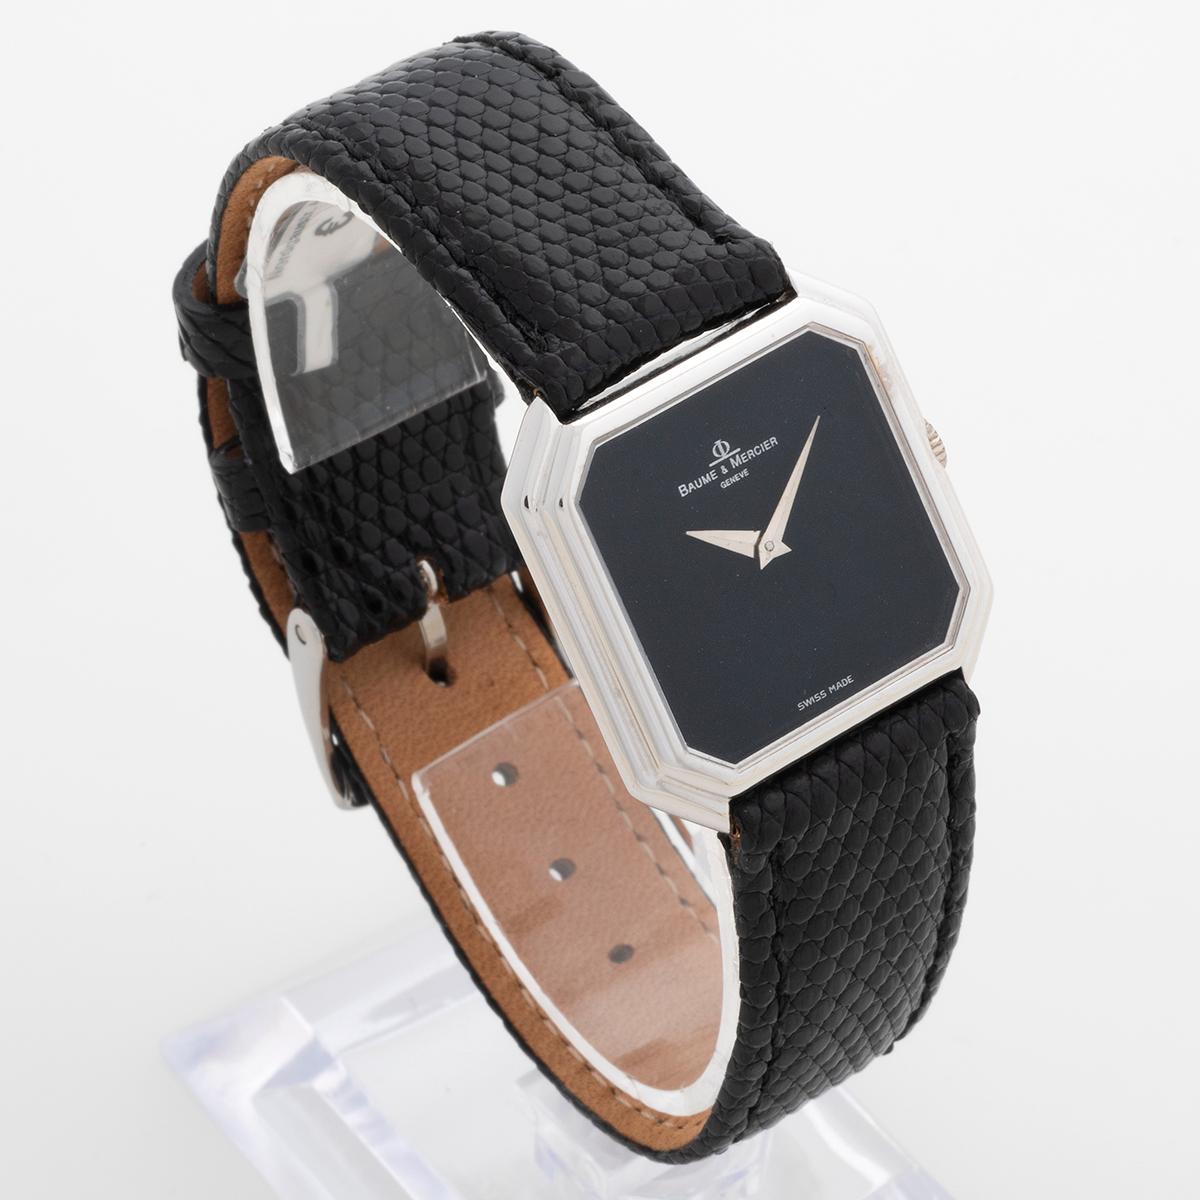 Our stunning vintage manually wound Baume & Mercier dress watch features an attractive onyx black dial and 28mm  18k white gold case, and is presented in outstanding condition. A quality leather strap and steel tang buckle have been fitted. We date